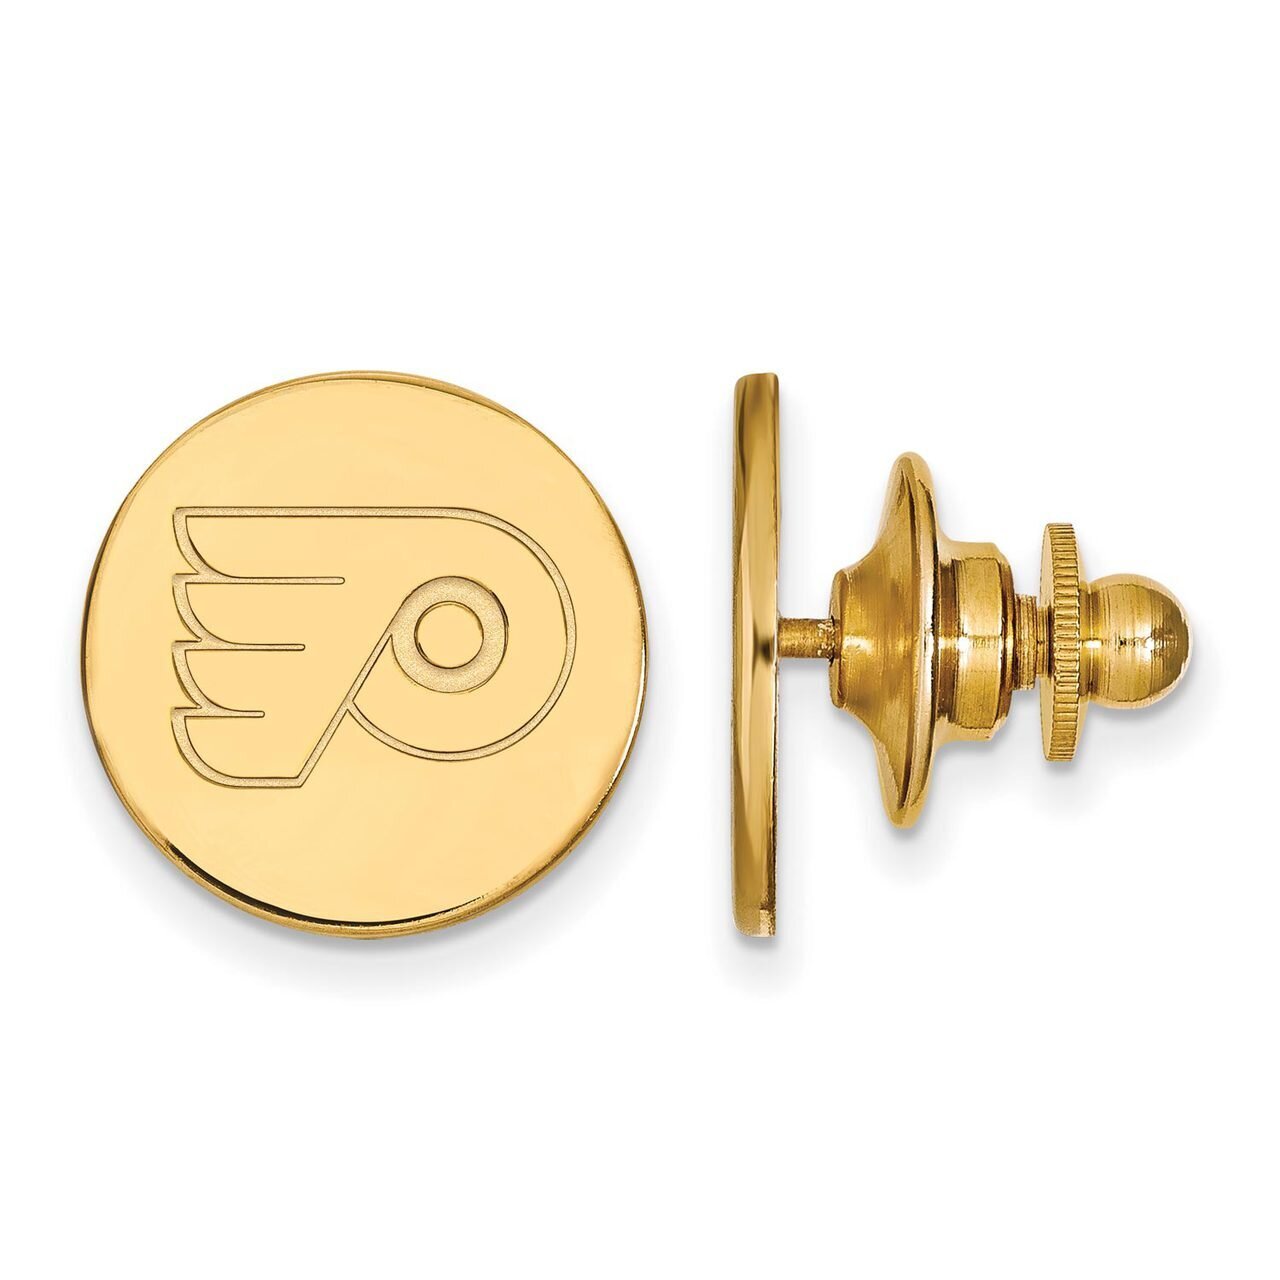 Philadelphia Flyers Lapel Pin Gold-plated Silver GP009FLY